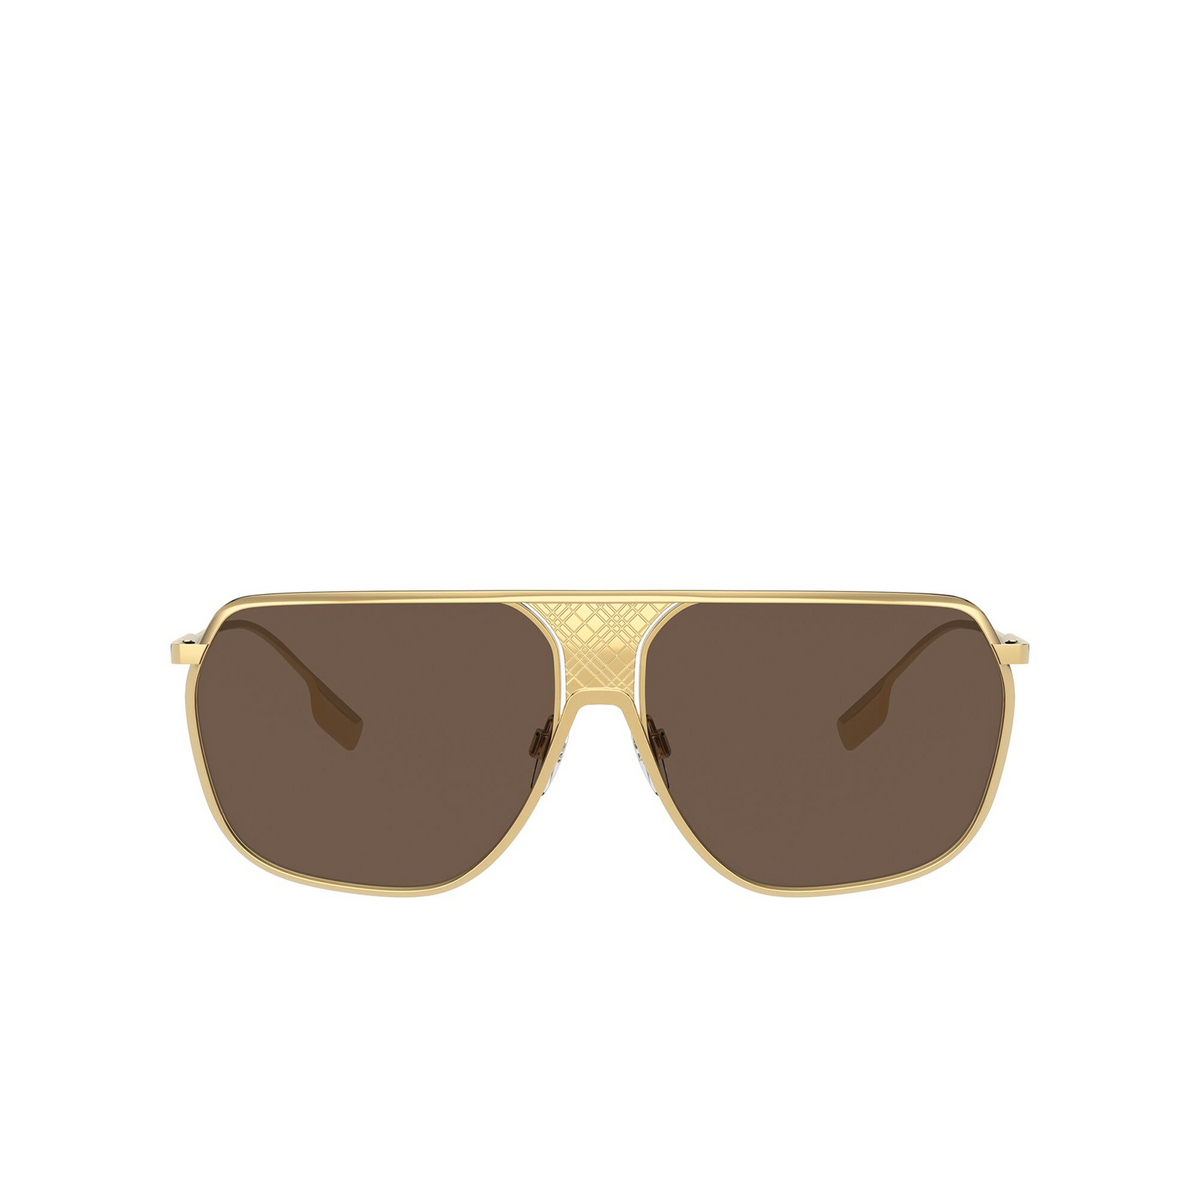 Burberry® Square Sunglasses: Adam BE3120 color Gold 101773 - front view.